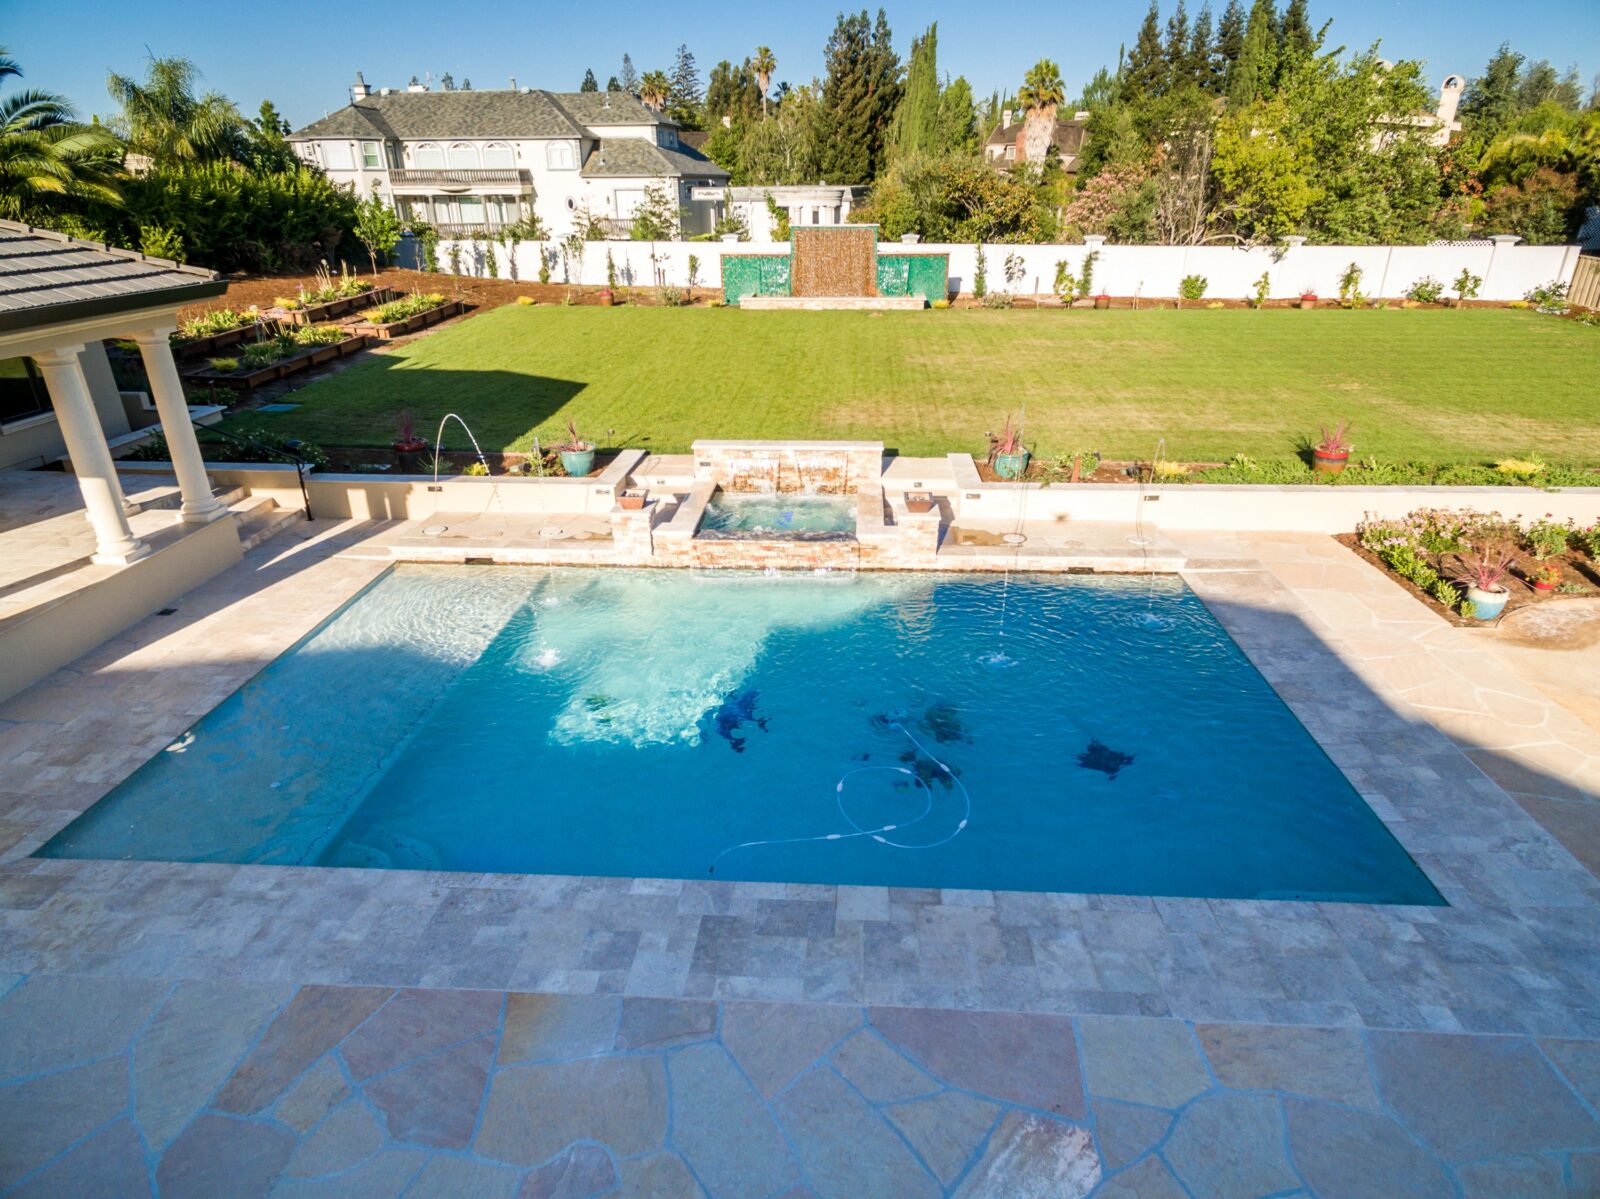 Backyard view of a beautiful, functional and comfortable home to enjoy in Cupertino